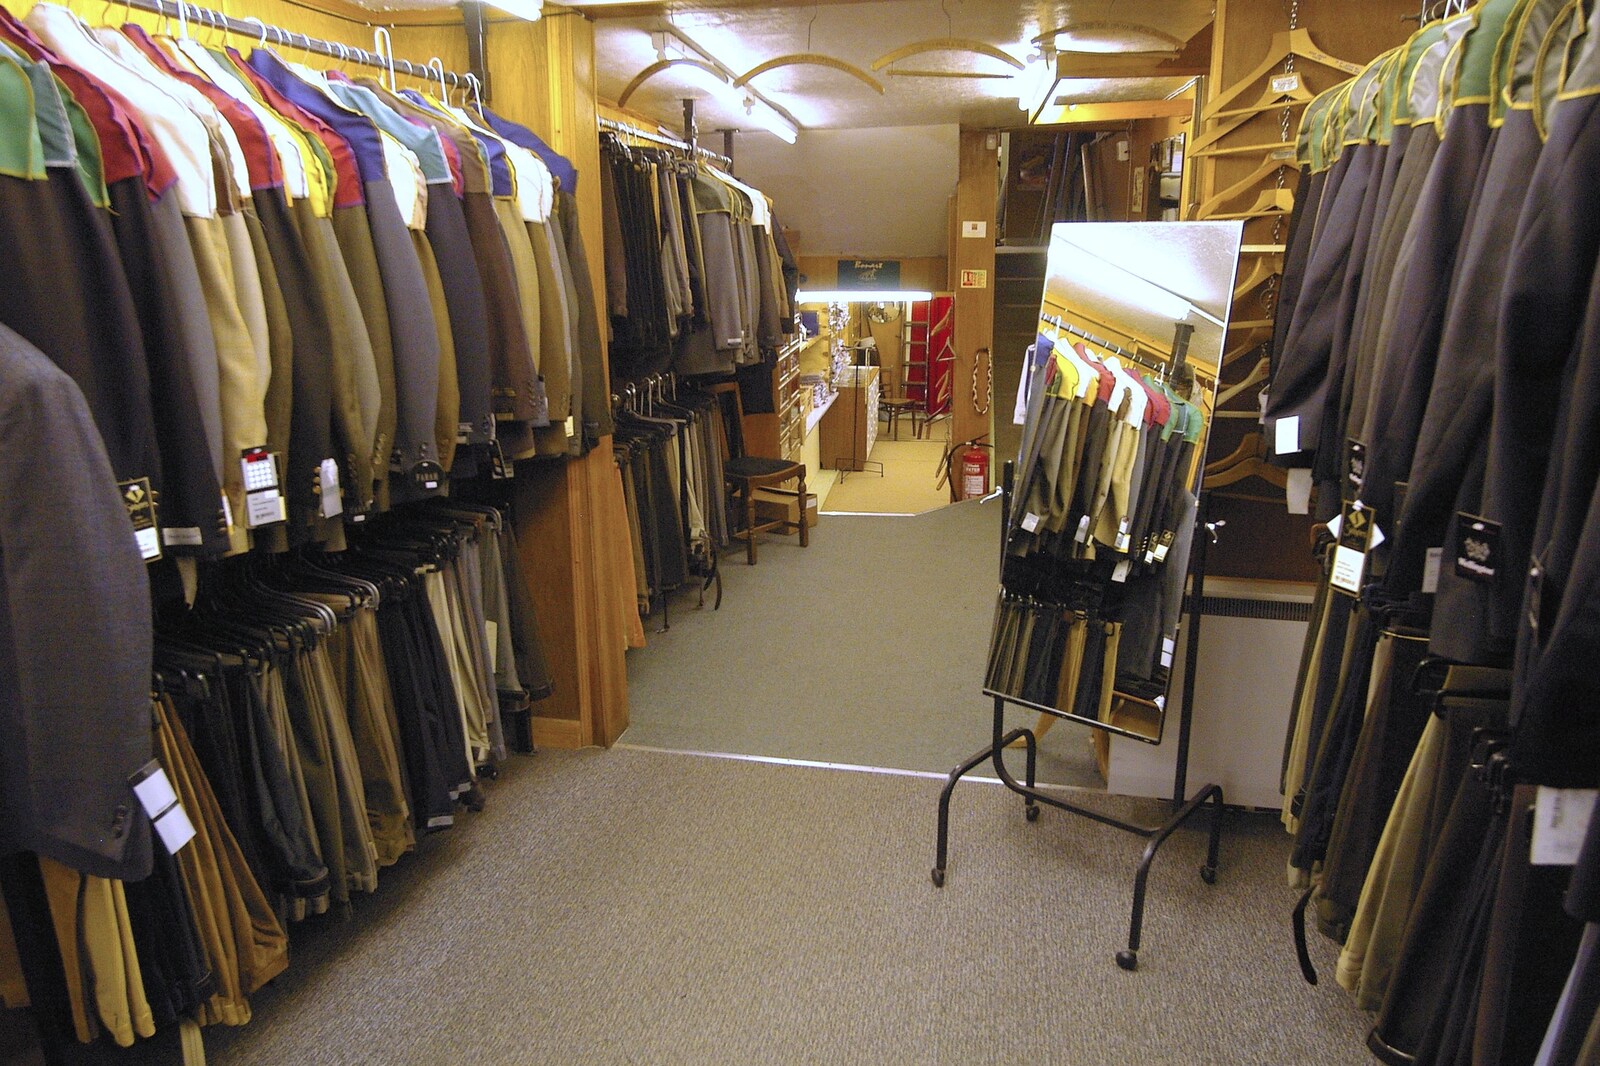 Racks of suits, and a fitting mirror from A Portrait of Hopgoods: Gentlemen's Outfitters, Diss, Norfolk - 4th January 2006